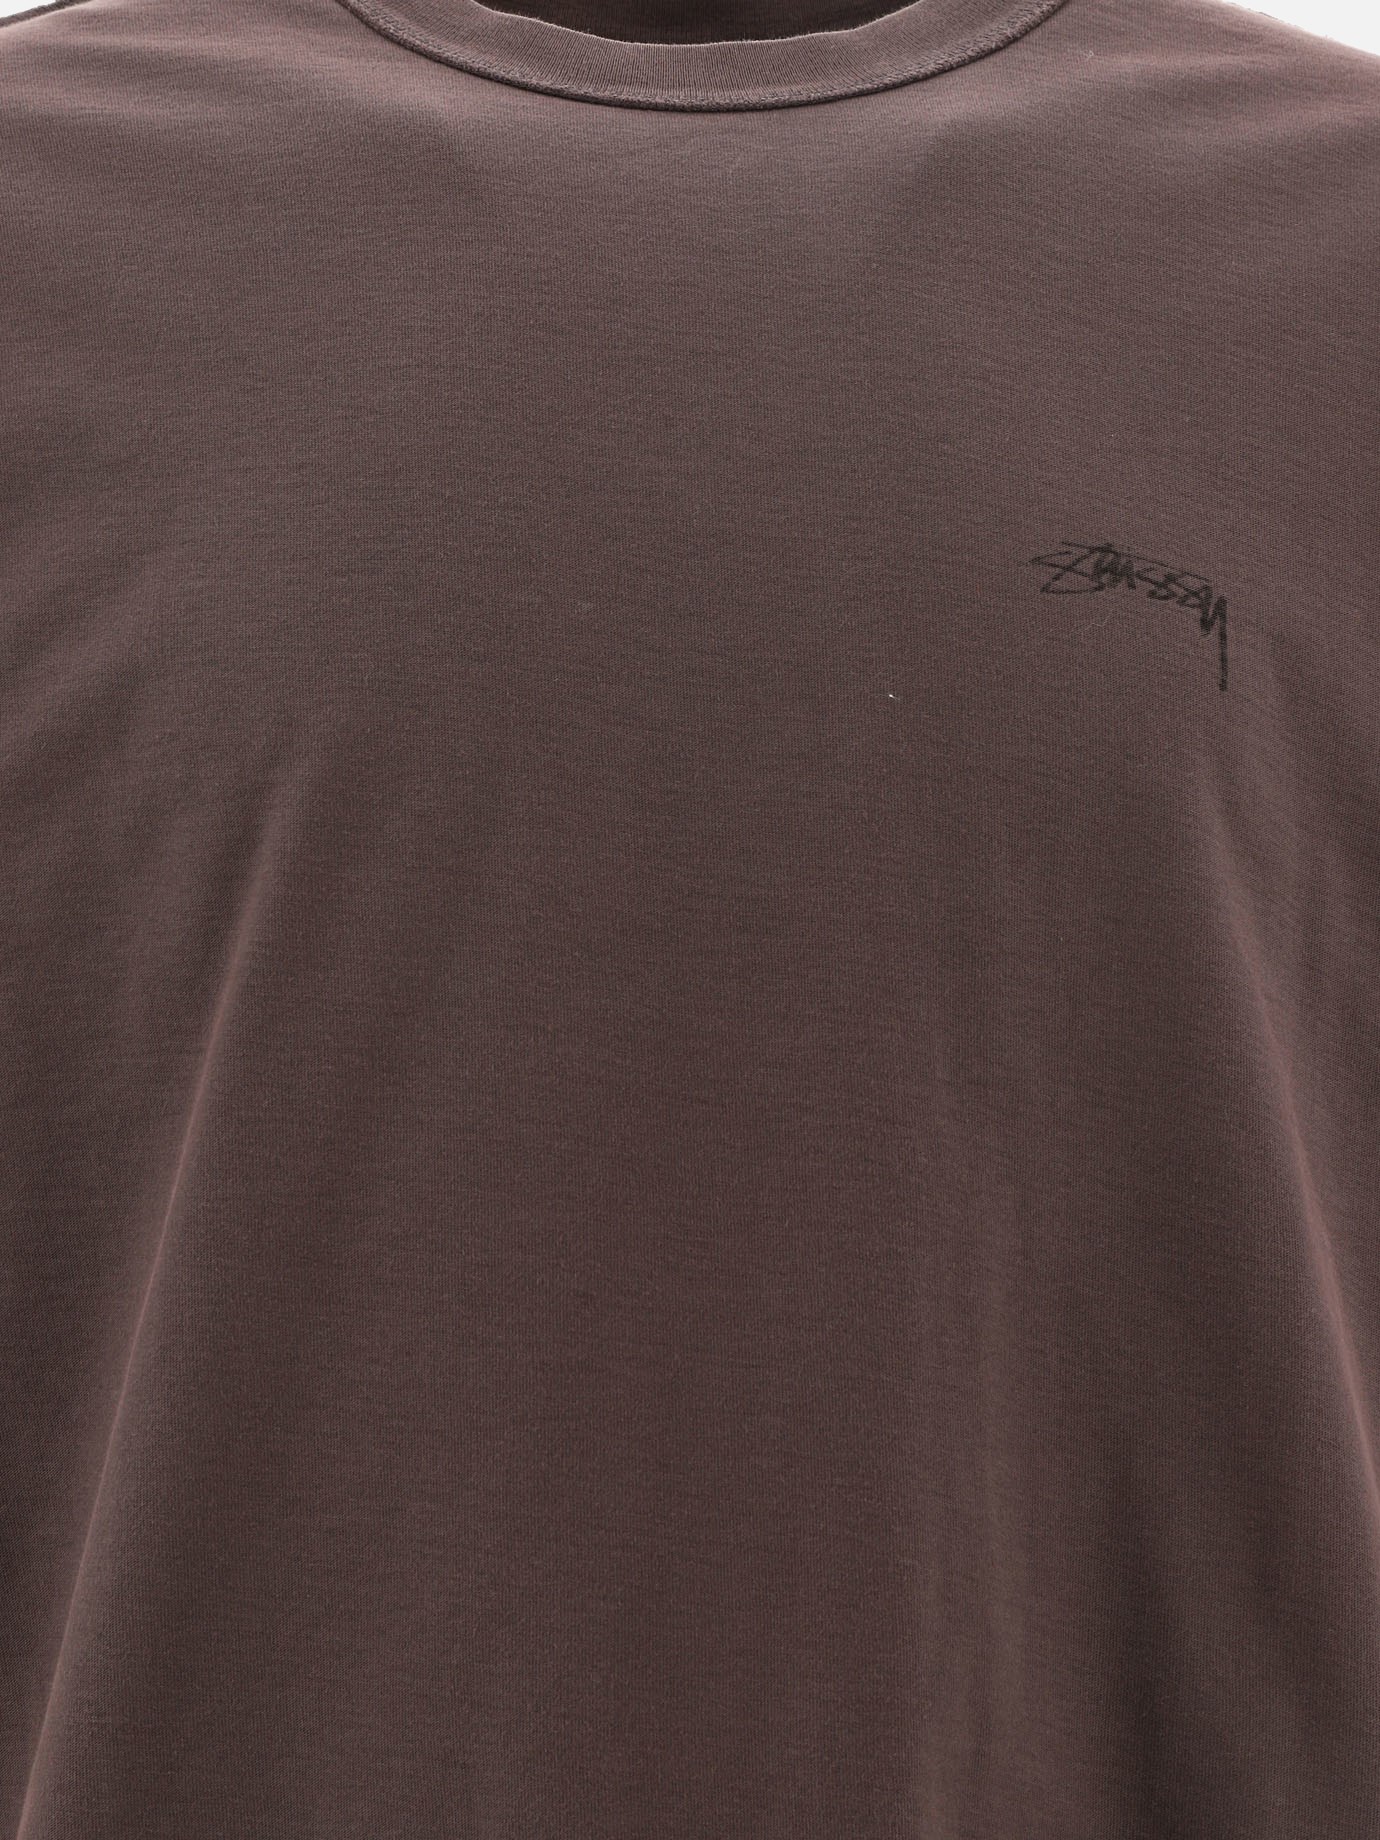 T-shirt  Pig Dyed Inside Out  by Stüssy